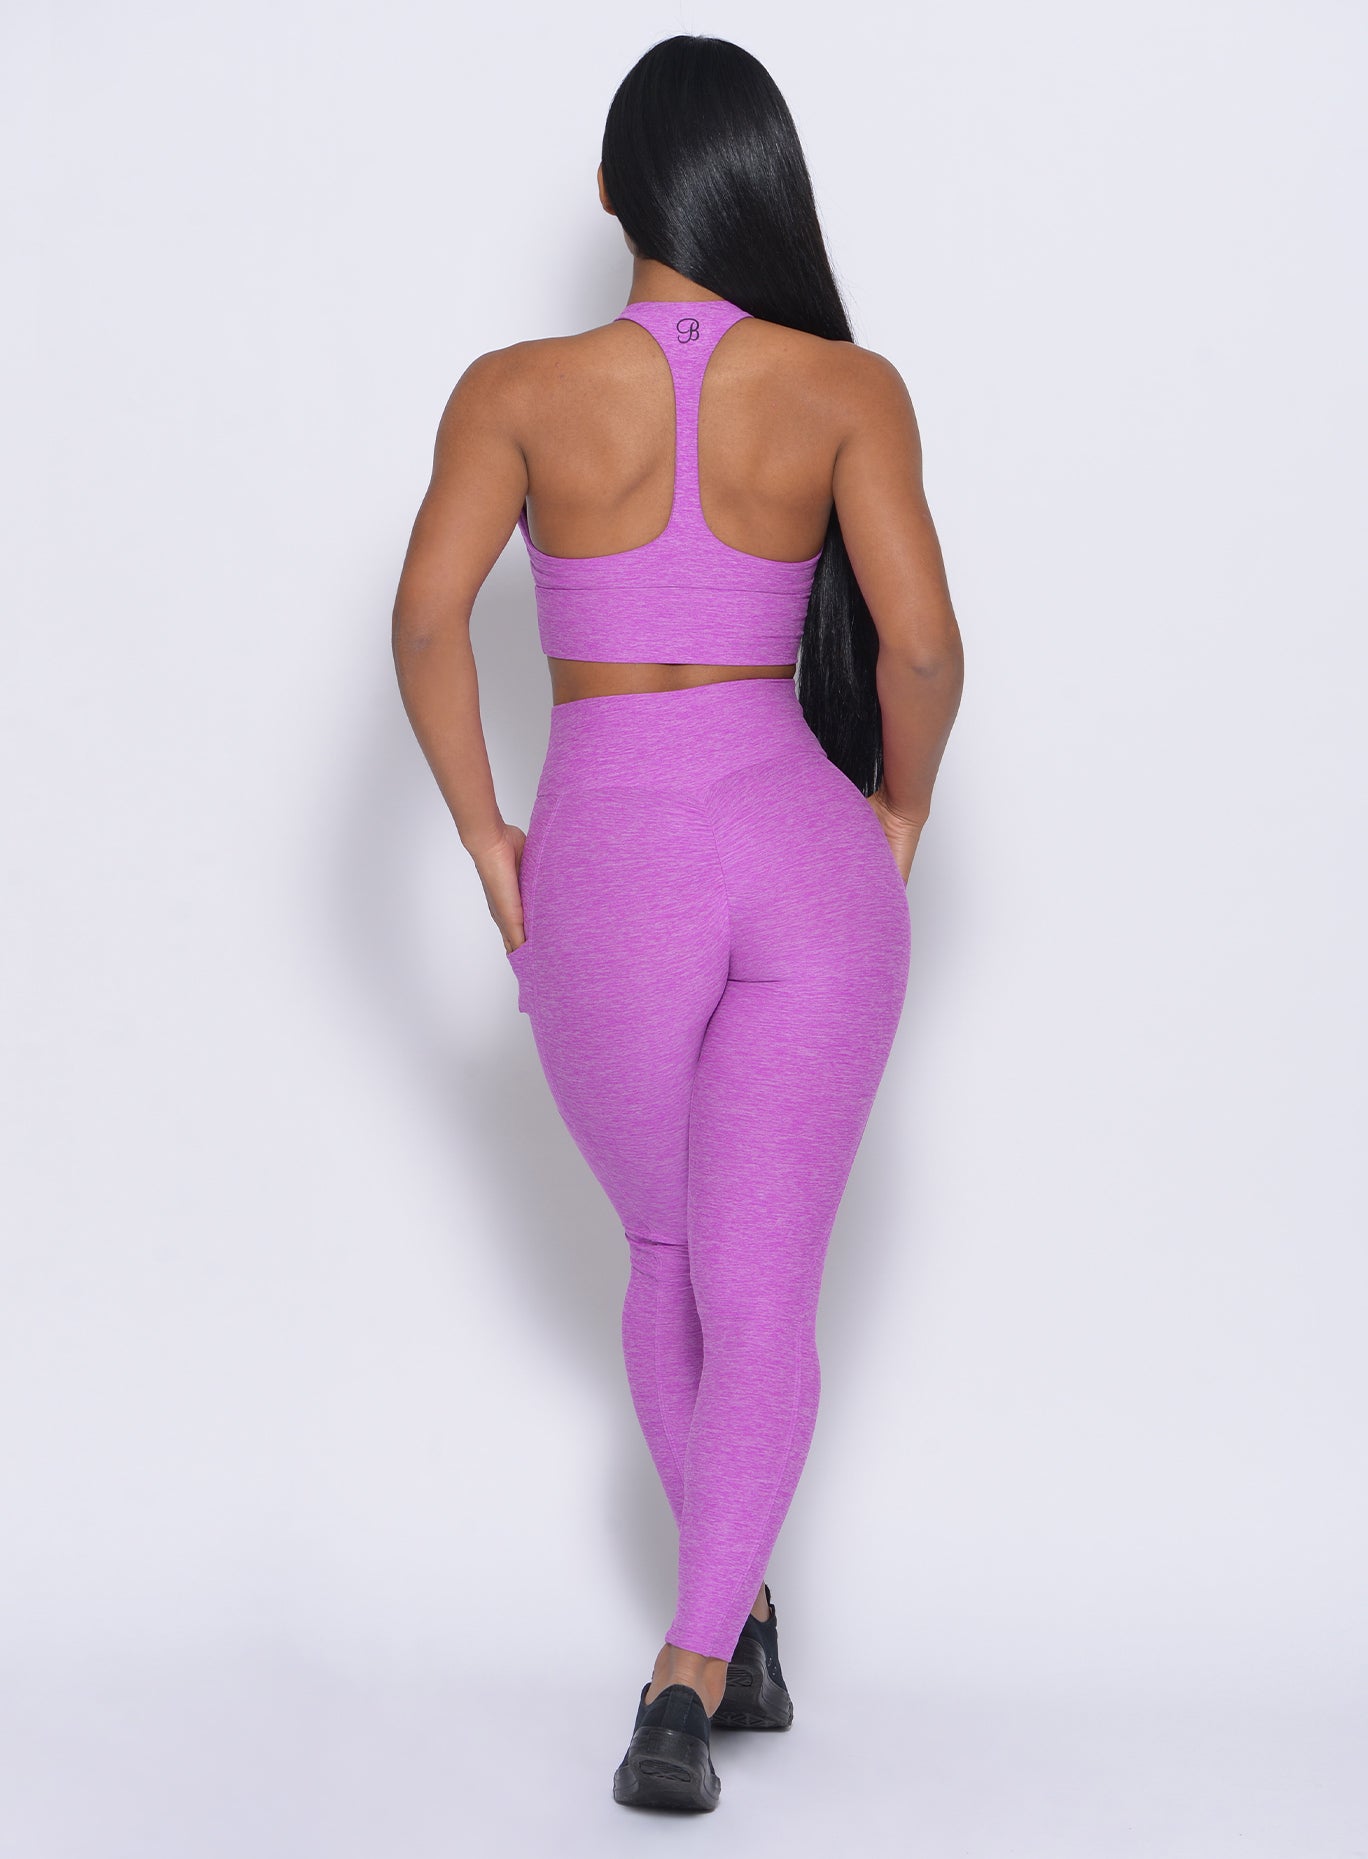 Back view of the model wearing our thrive leggings in purple color and a matching bra